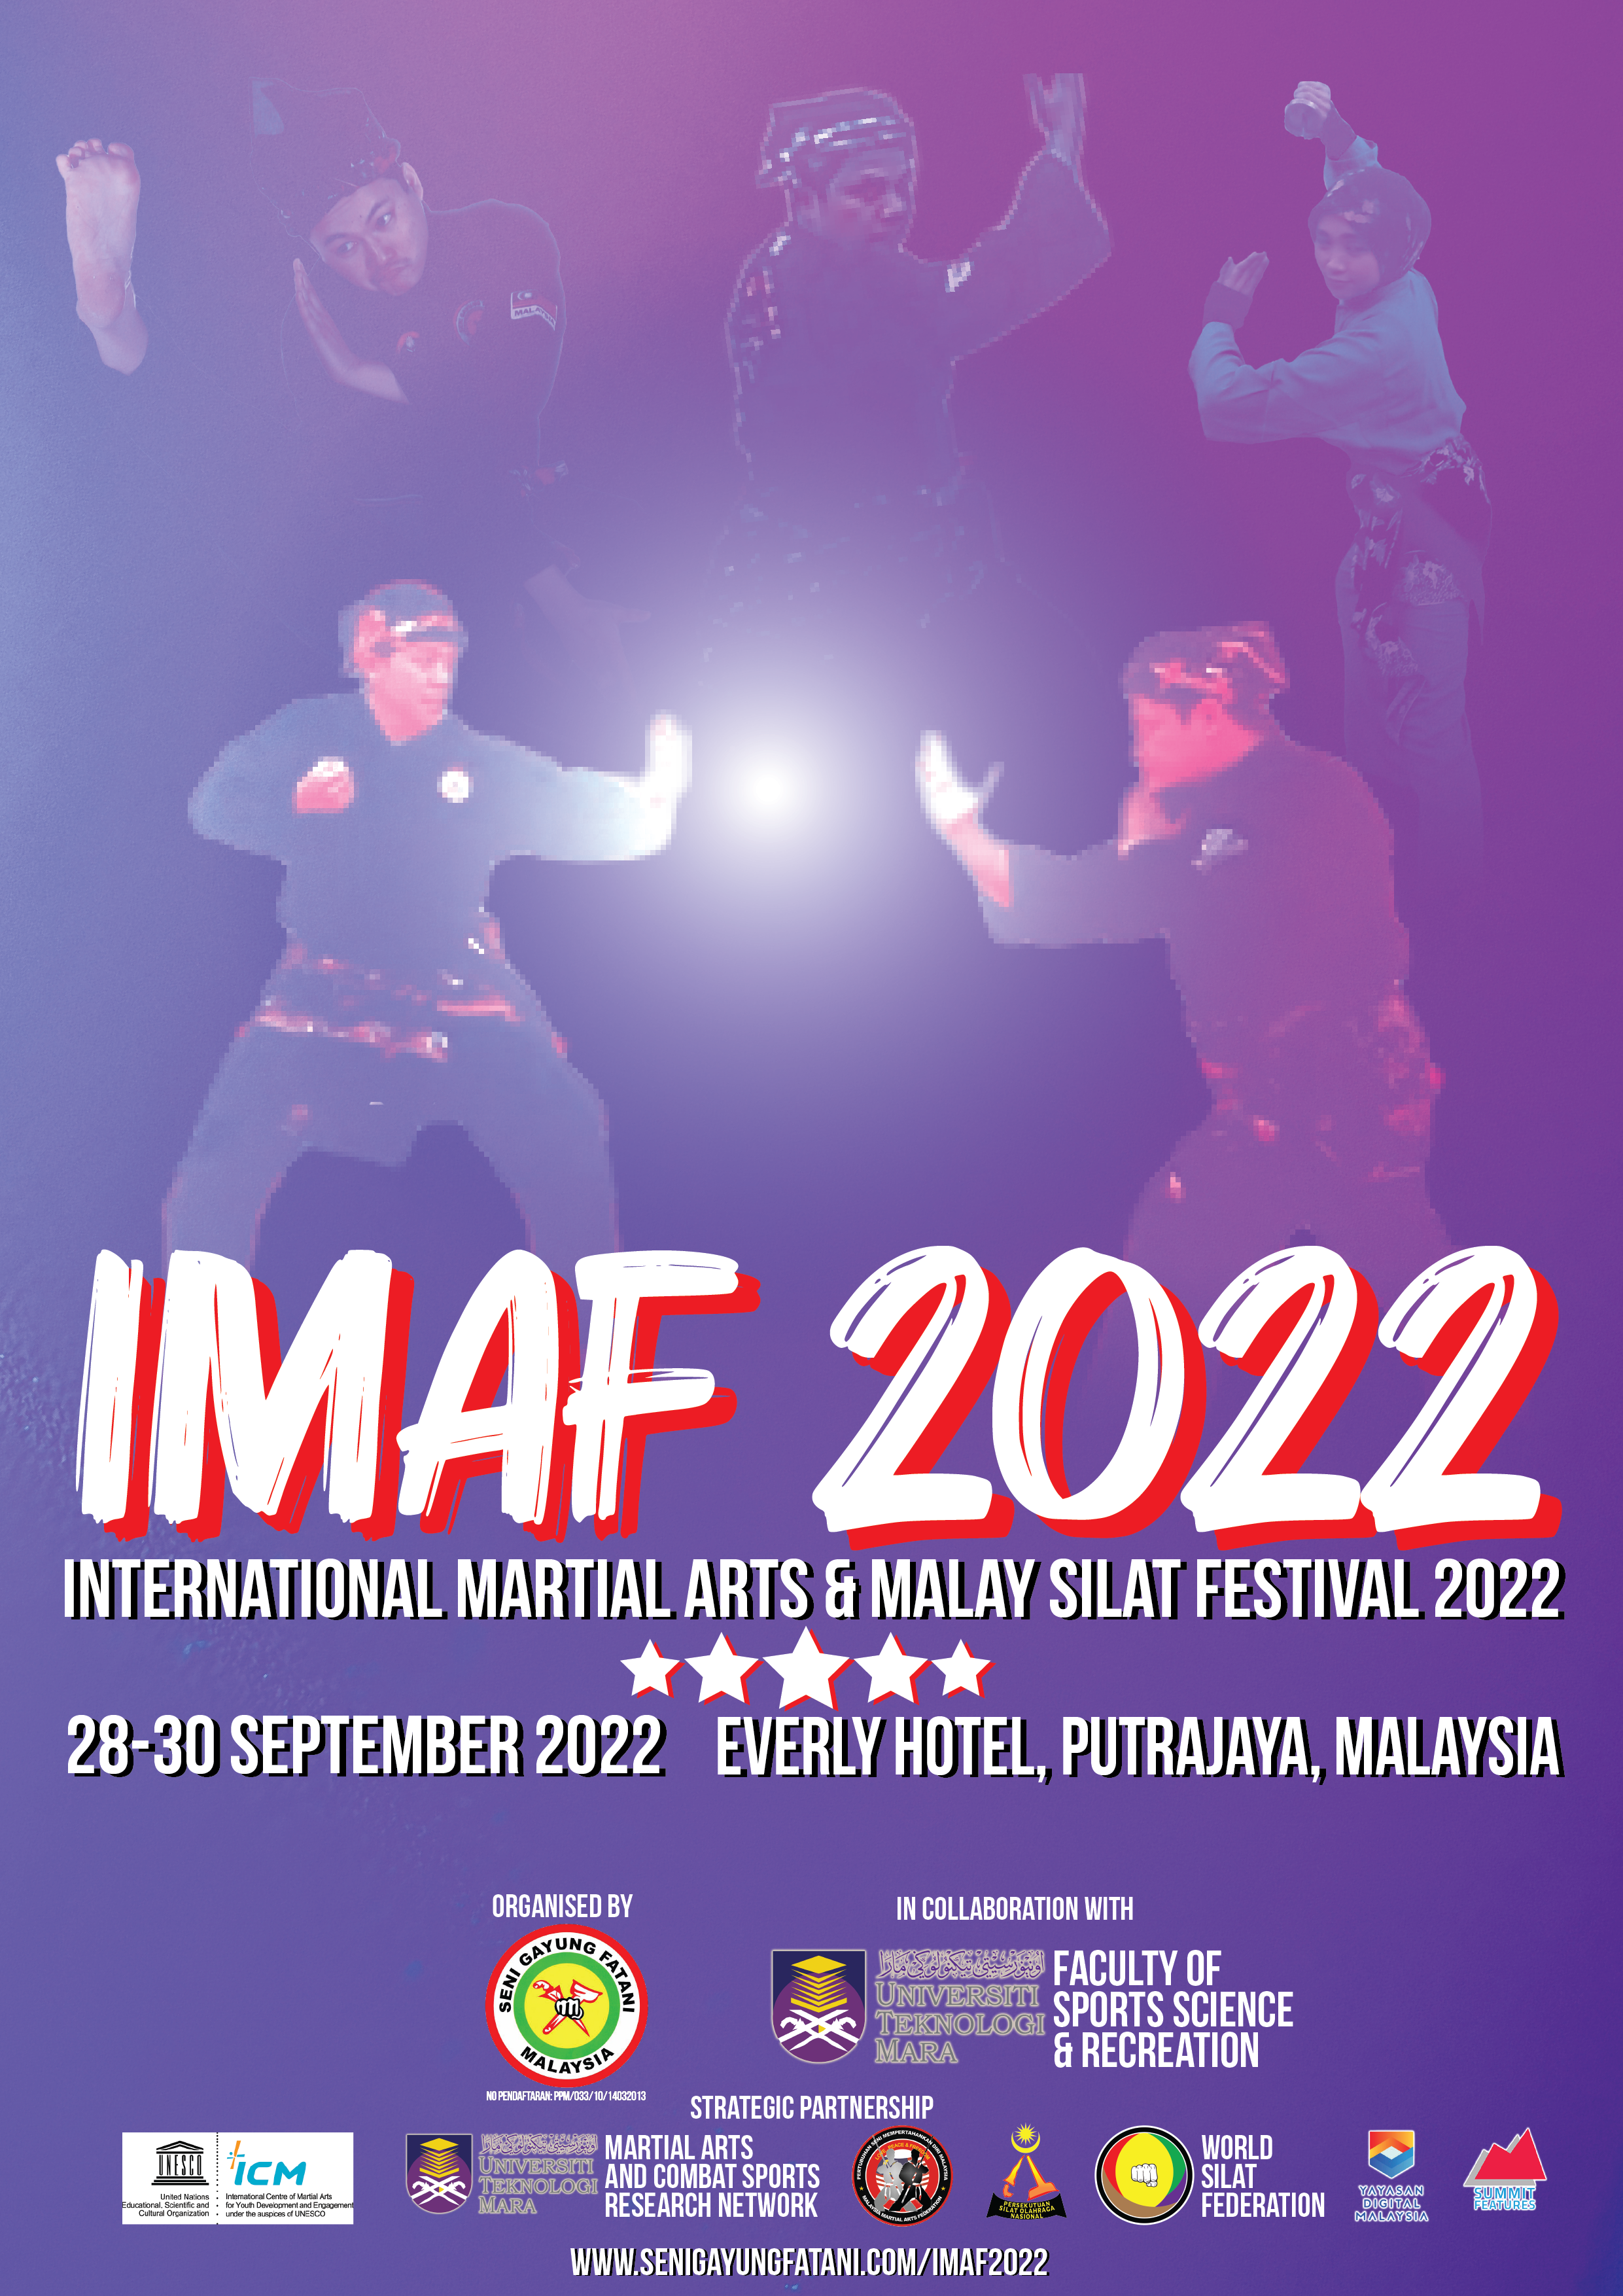 About IMAF2022